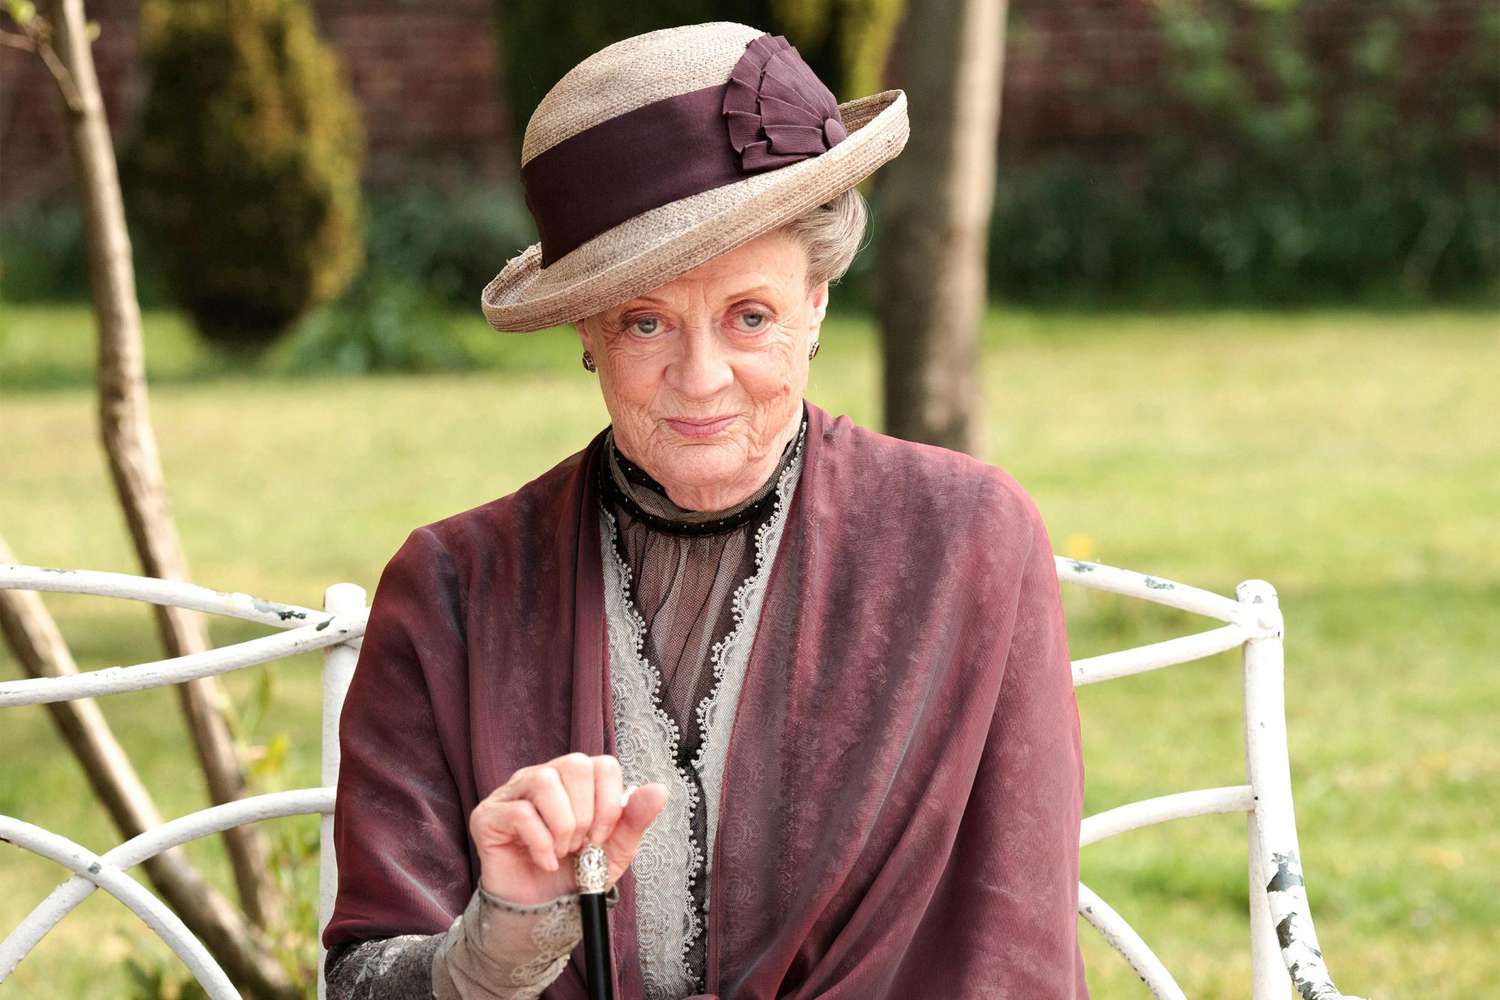 Downton Abbey Season 2 - Episode 3 January 22, 2012 at 9pm ET on PBS Shown: Dame Maggie Smith as the Dowager Countess Multiple Emmy? winner (including Best Miniseries!) Downton Abbey resumes the story of aristocrats and servants in the tumultuous World War I era. The international hit is written by Julian Fellowes and stars Dame Maggie Smith, Elizabeth McGovern, Hugh Bonneville, plus a drawing room full of new actors, portraying the loves, feuds, and sacrifices of a glittering culture thrown into crisis.